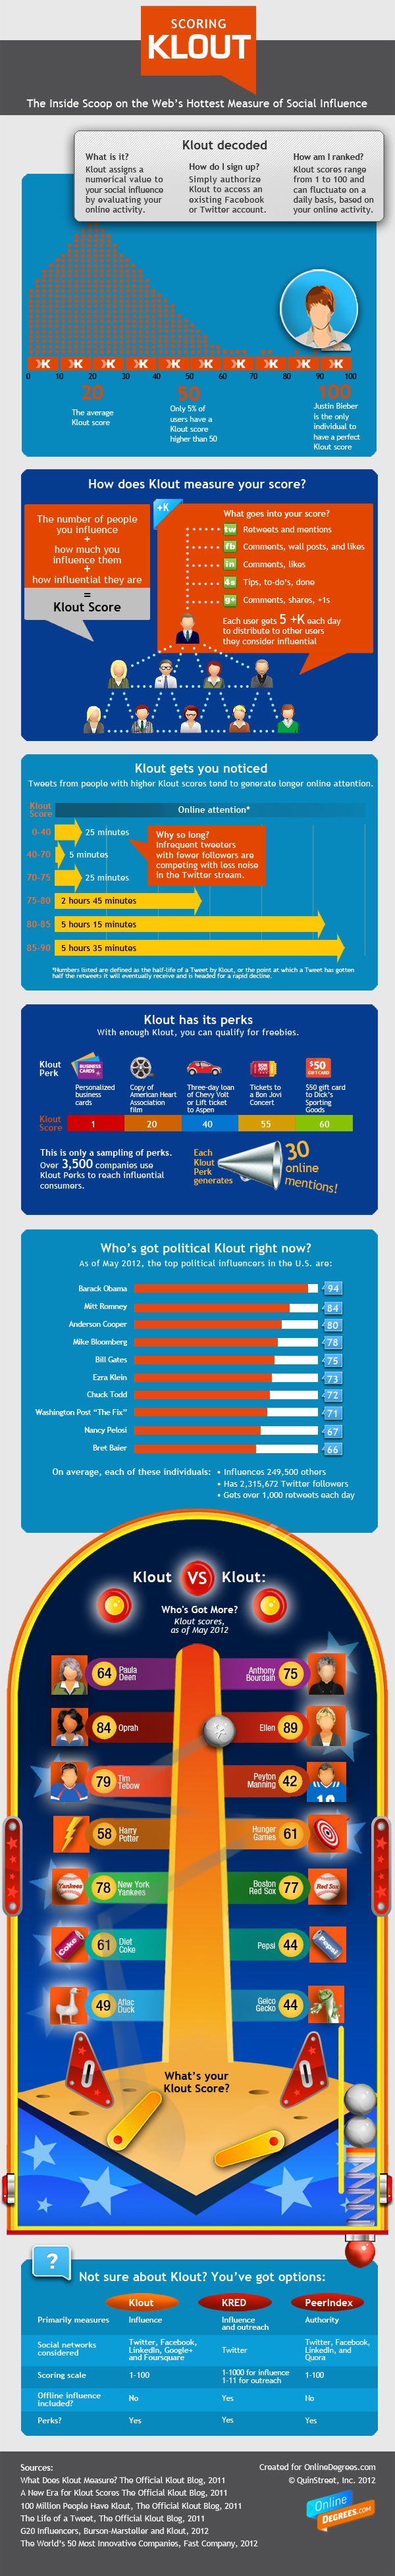 What is Klout?-infographic